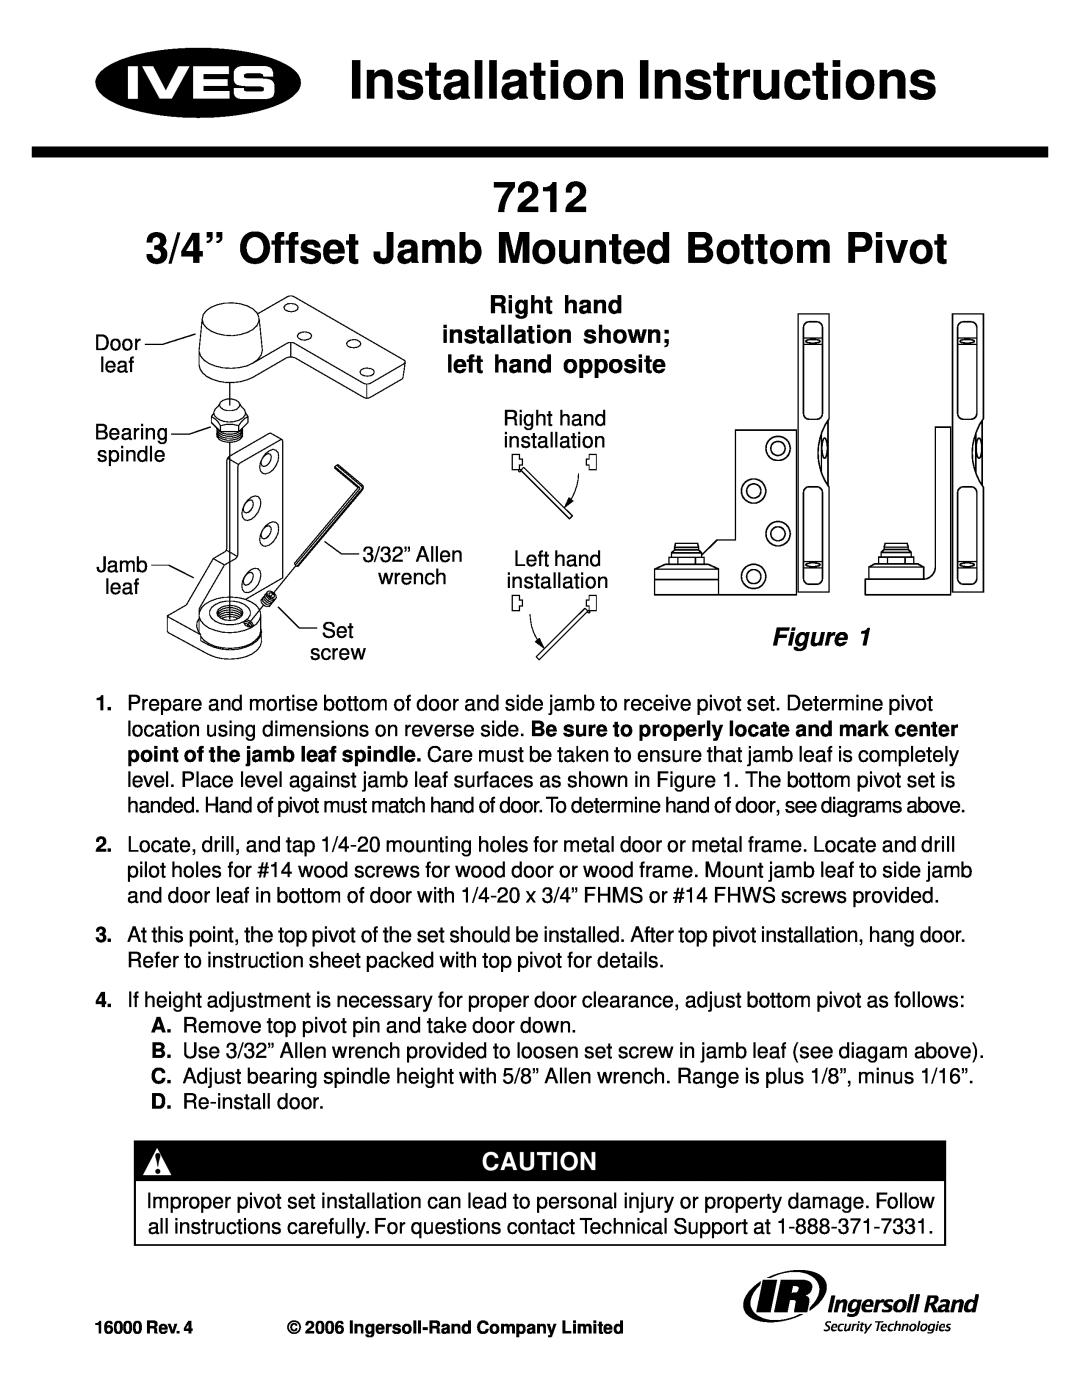 Ives 7212 installation instructions Right hand, left hand opposite, Installation Instructions, installation shown 